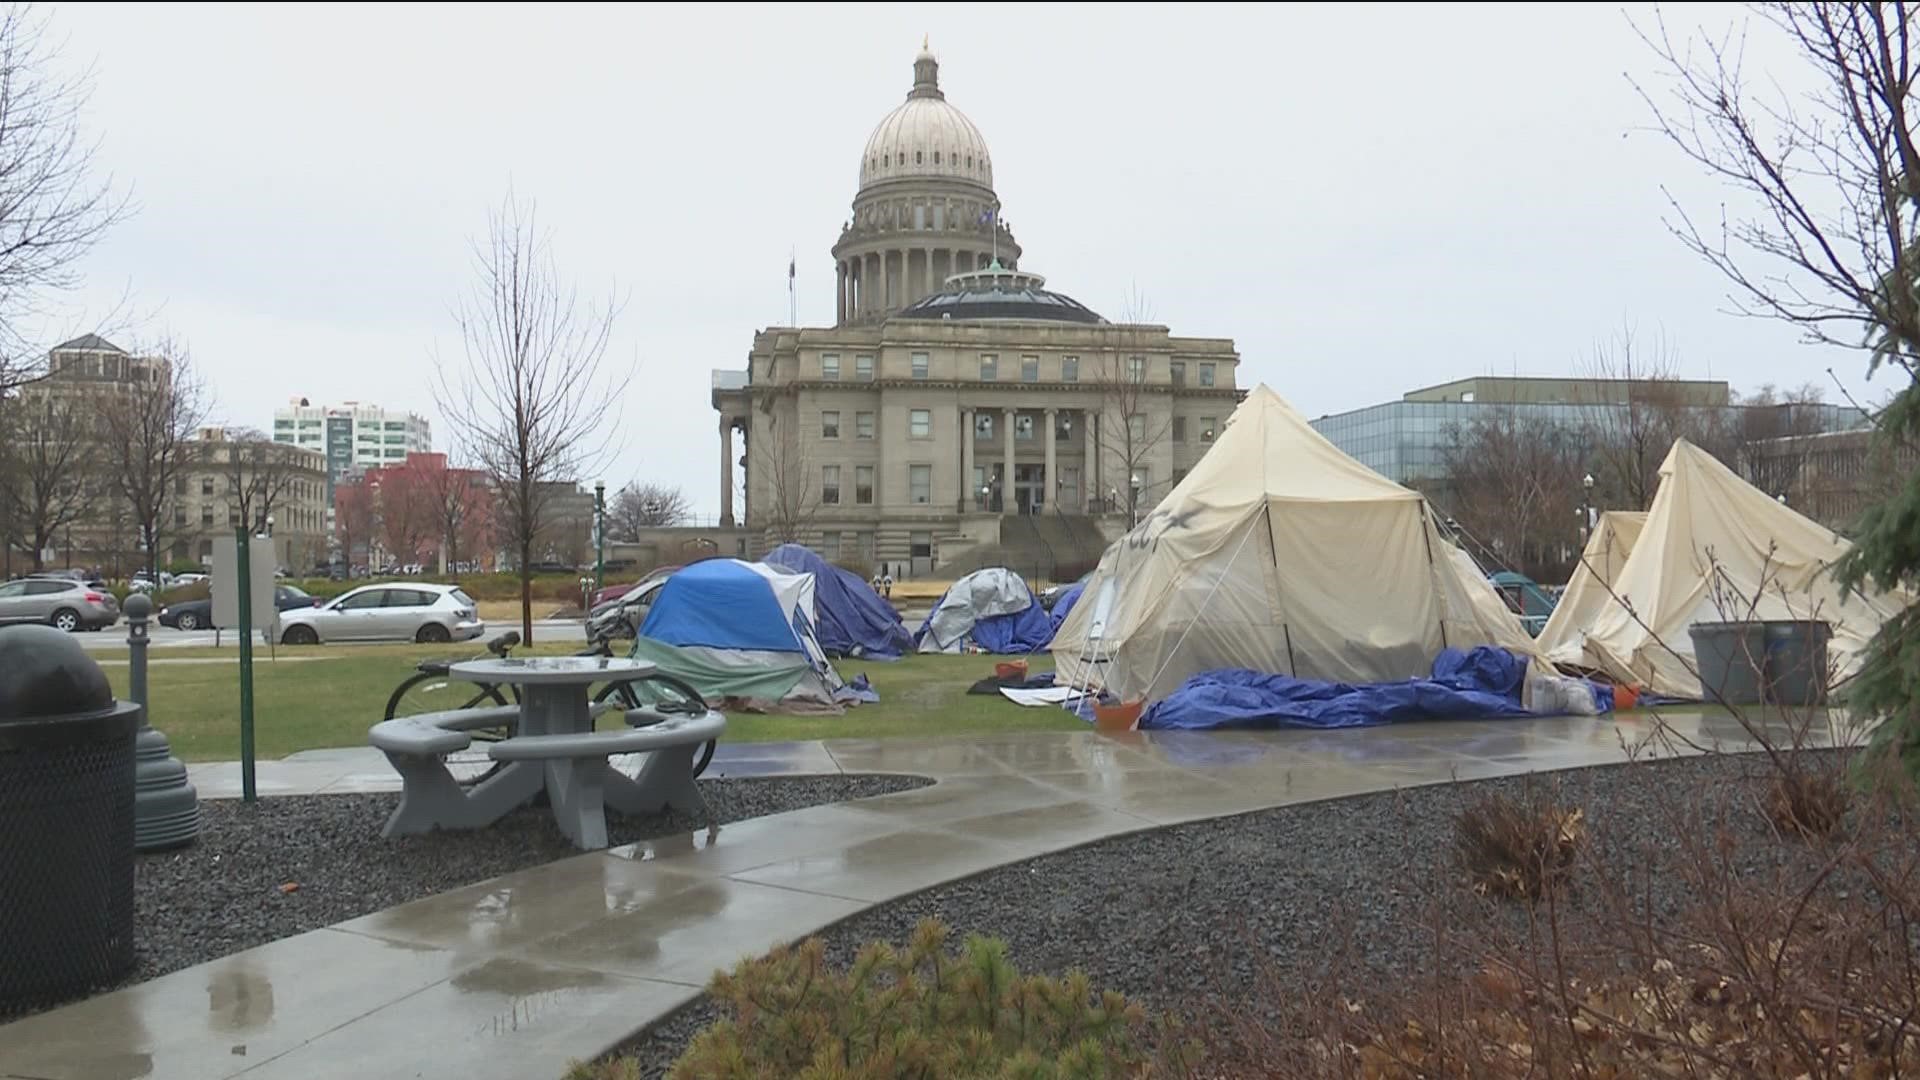 Over a year ago individuals started to gather on Idaho state property located near Jefferson and 6th streets in Boise.